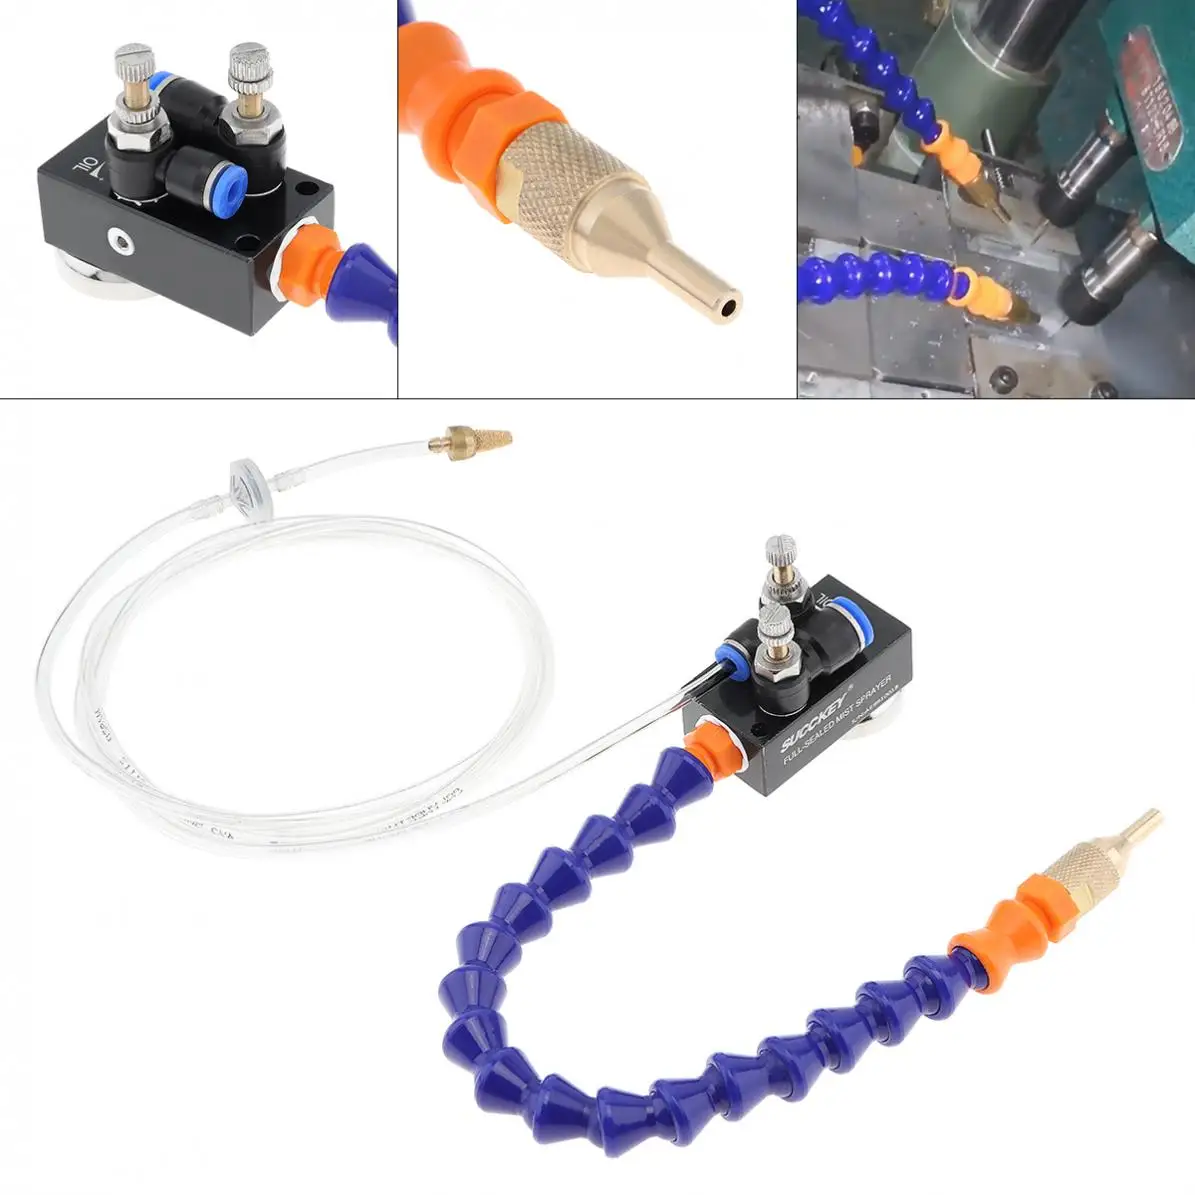 

30cm Mist Coolant Lubrication Spray System with 0.6mm Inner Diameter Micro Nozzle for Metal Cutting Engraving Cooling Machine